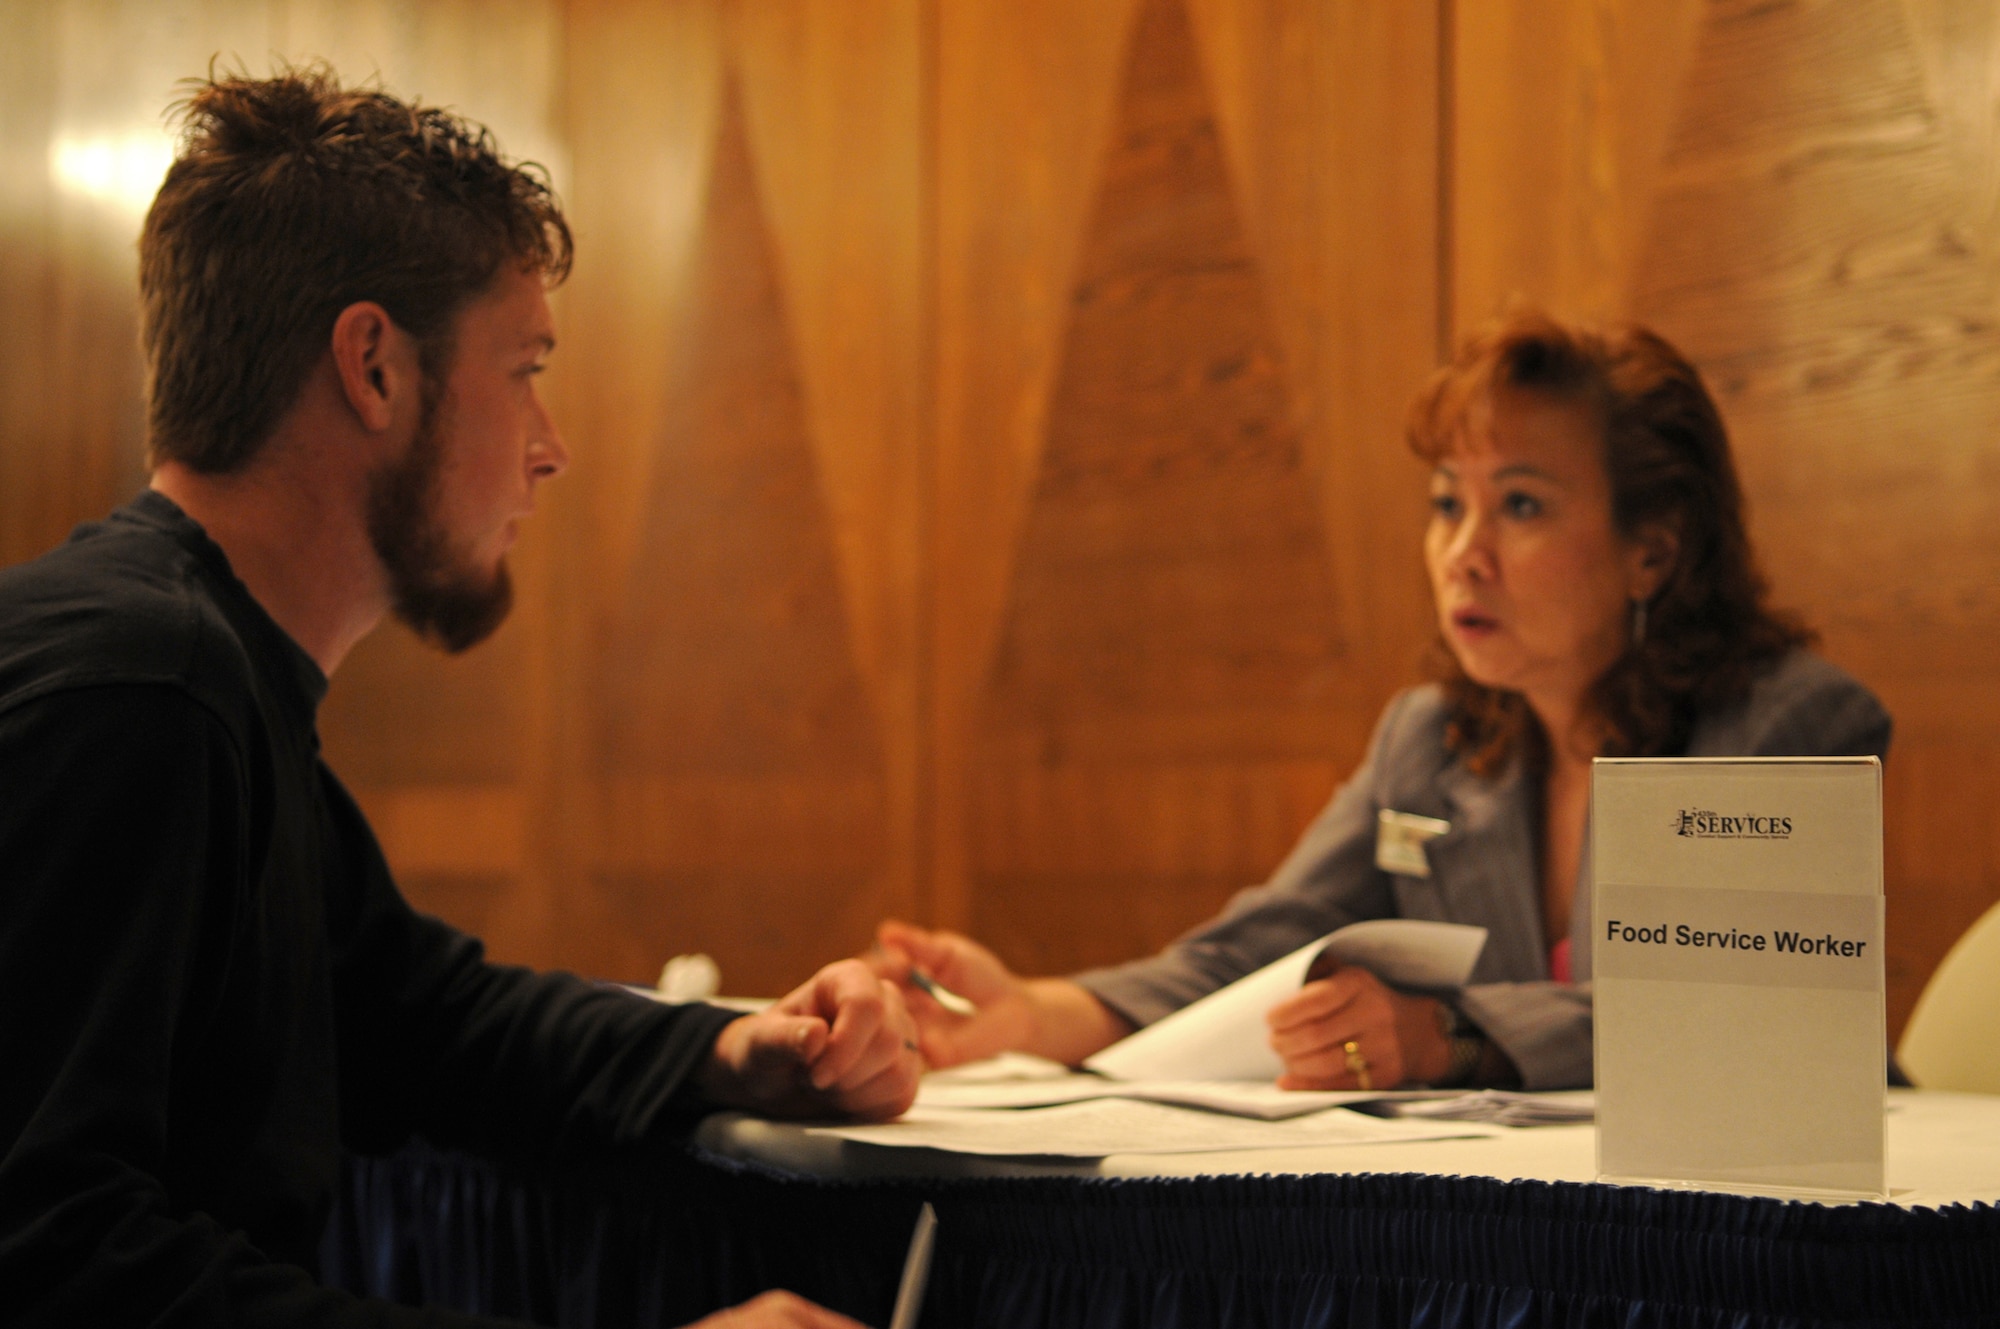 Charlie Knoll, a military dependant, gets interviewed by Maria Wells, 435th Services Human Resources director, at the 435th Services Job Fair held on Ramstein Air Base, Germany, May 18, 2009. The 435th SVS plans to employ more than 650 civilians, dependents and off-duty military hires for the upcoming KMCC. (U.S. Air Force photo by Airman 1st Class Grovert Fuentes-Contreras)